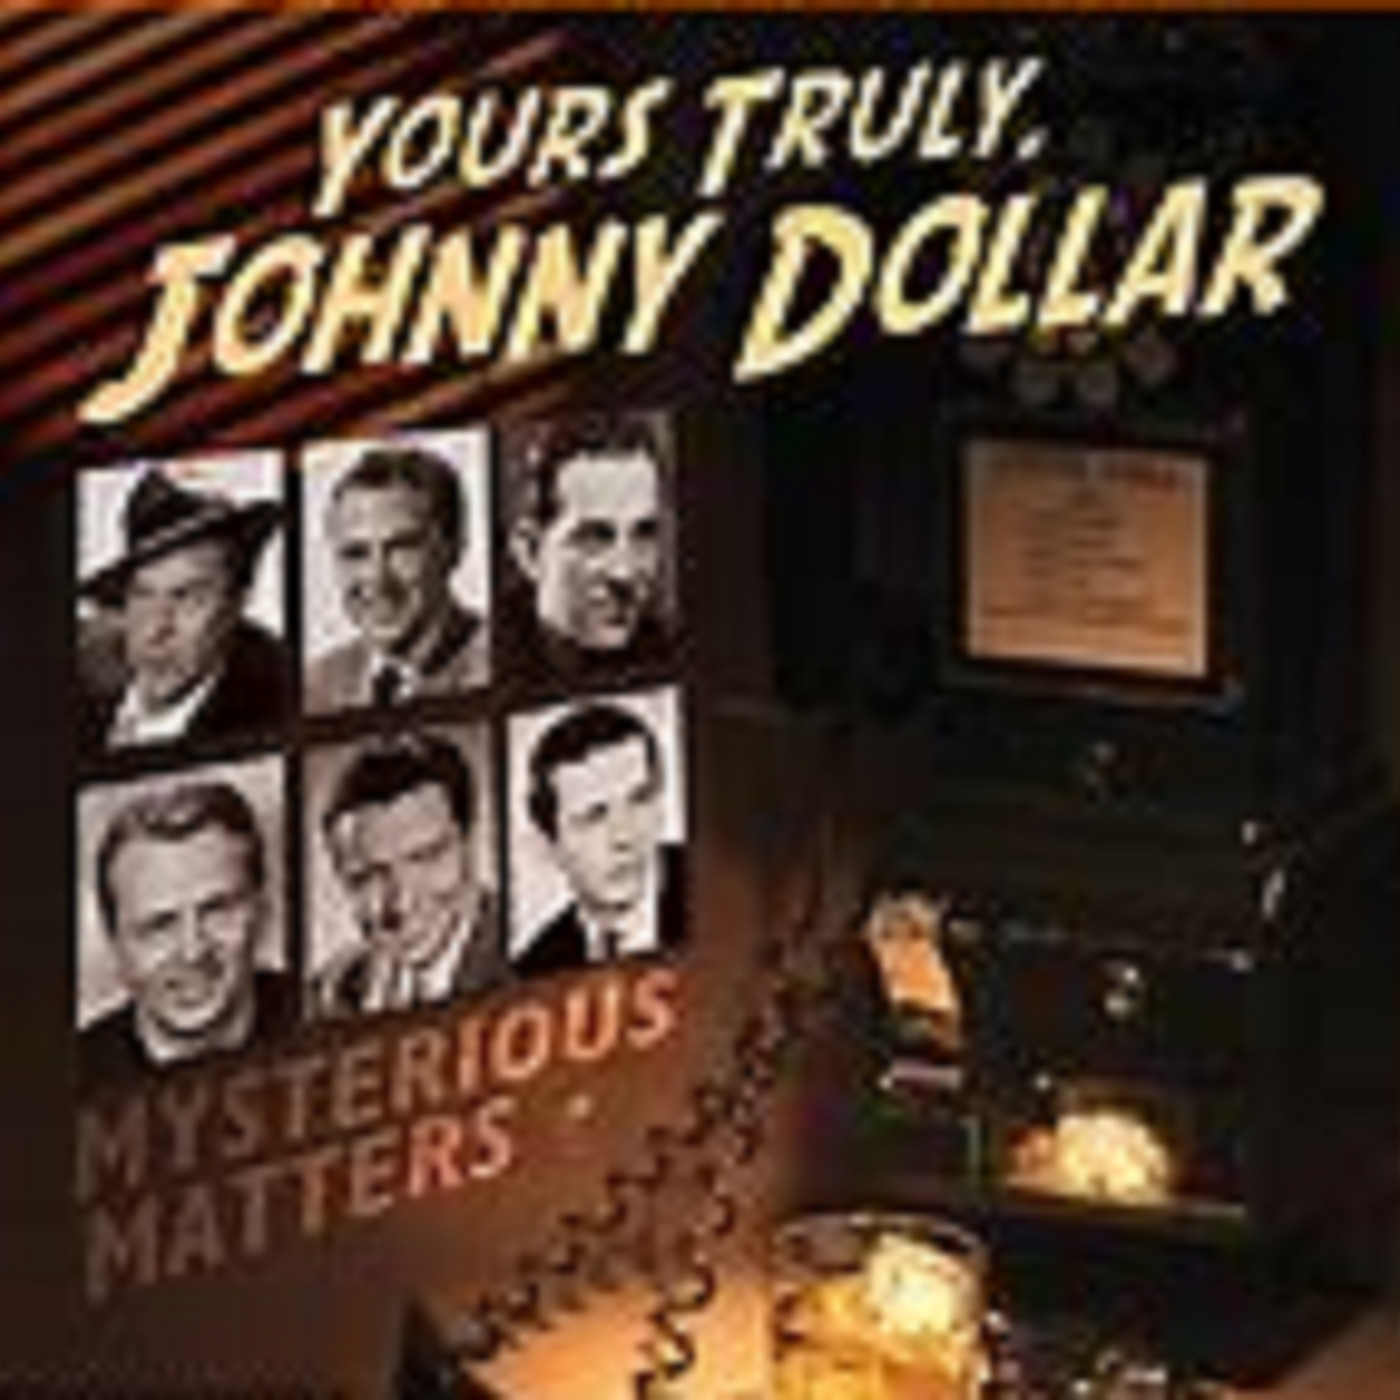 Yours Truly, Johnny Dollar - 090659, episode 655 - The Backfire That Backfired Matter